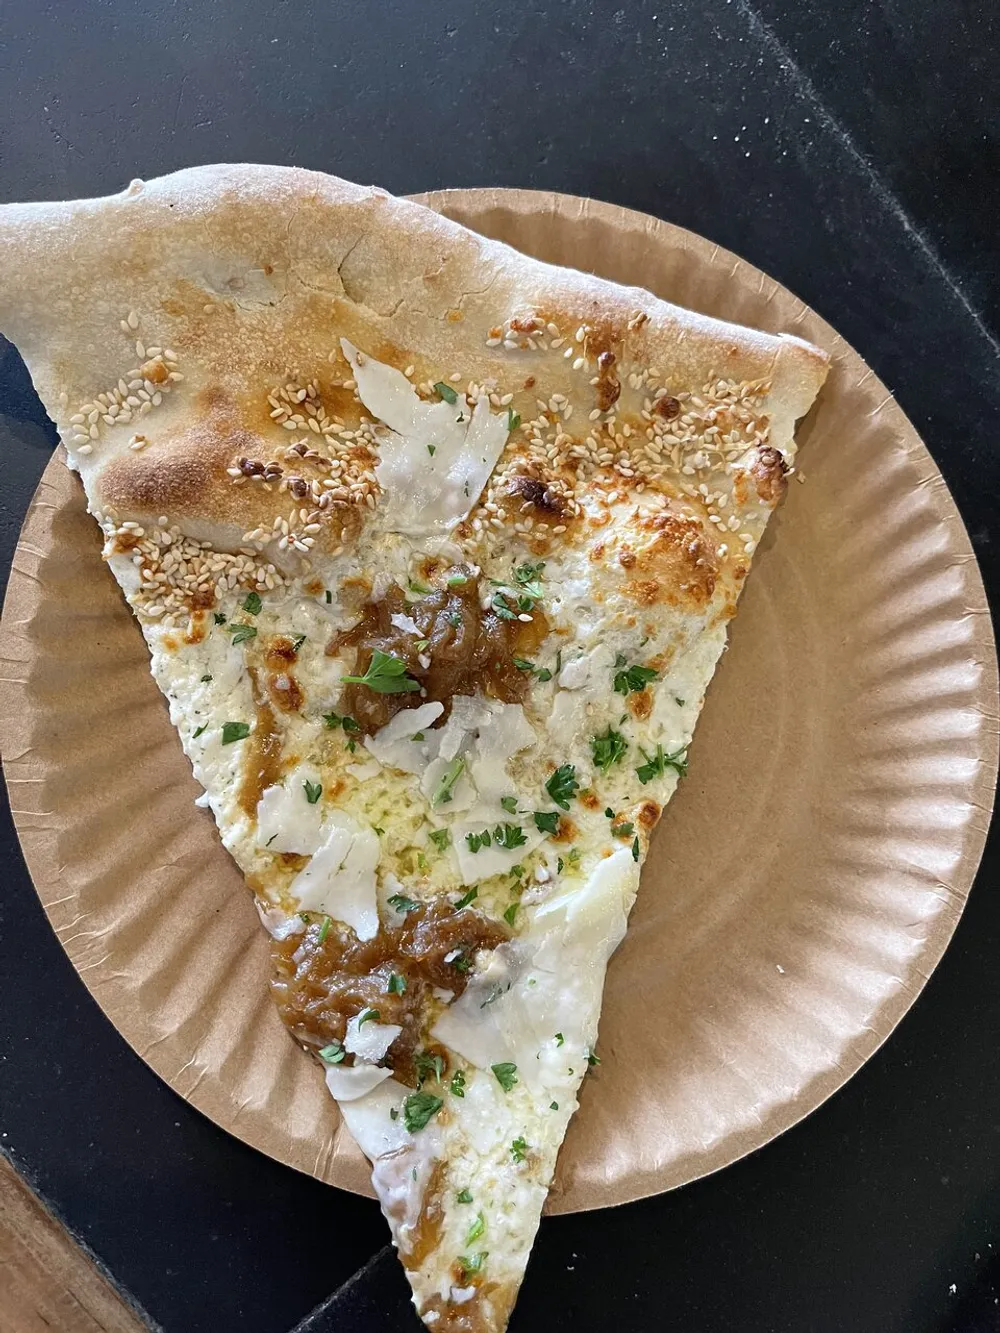 The image shows a slice of pizza with white cheese and caramelized onions sprinkled with sesame seeds and herbs on a brown paper plate